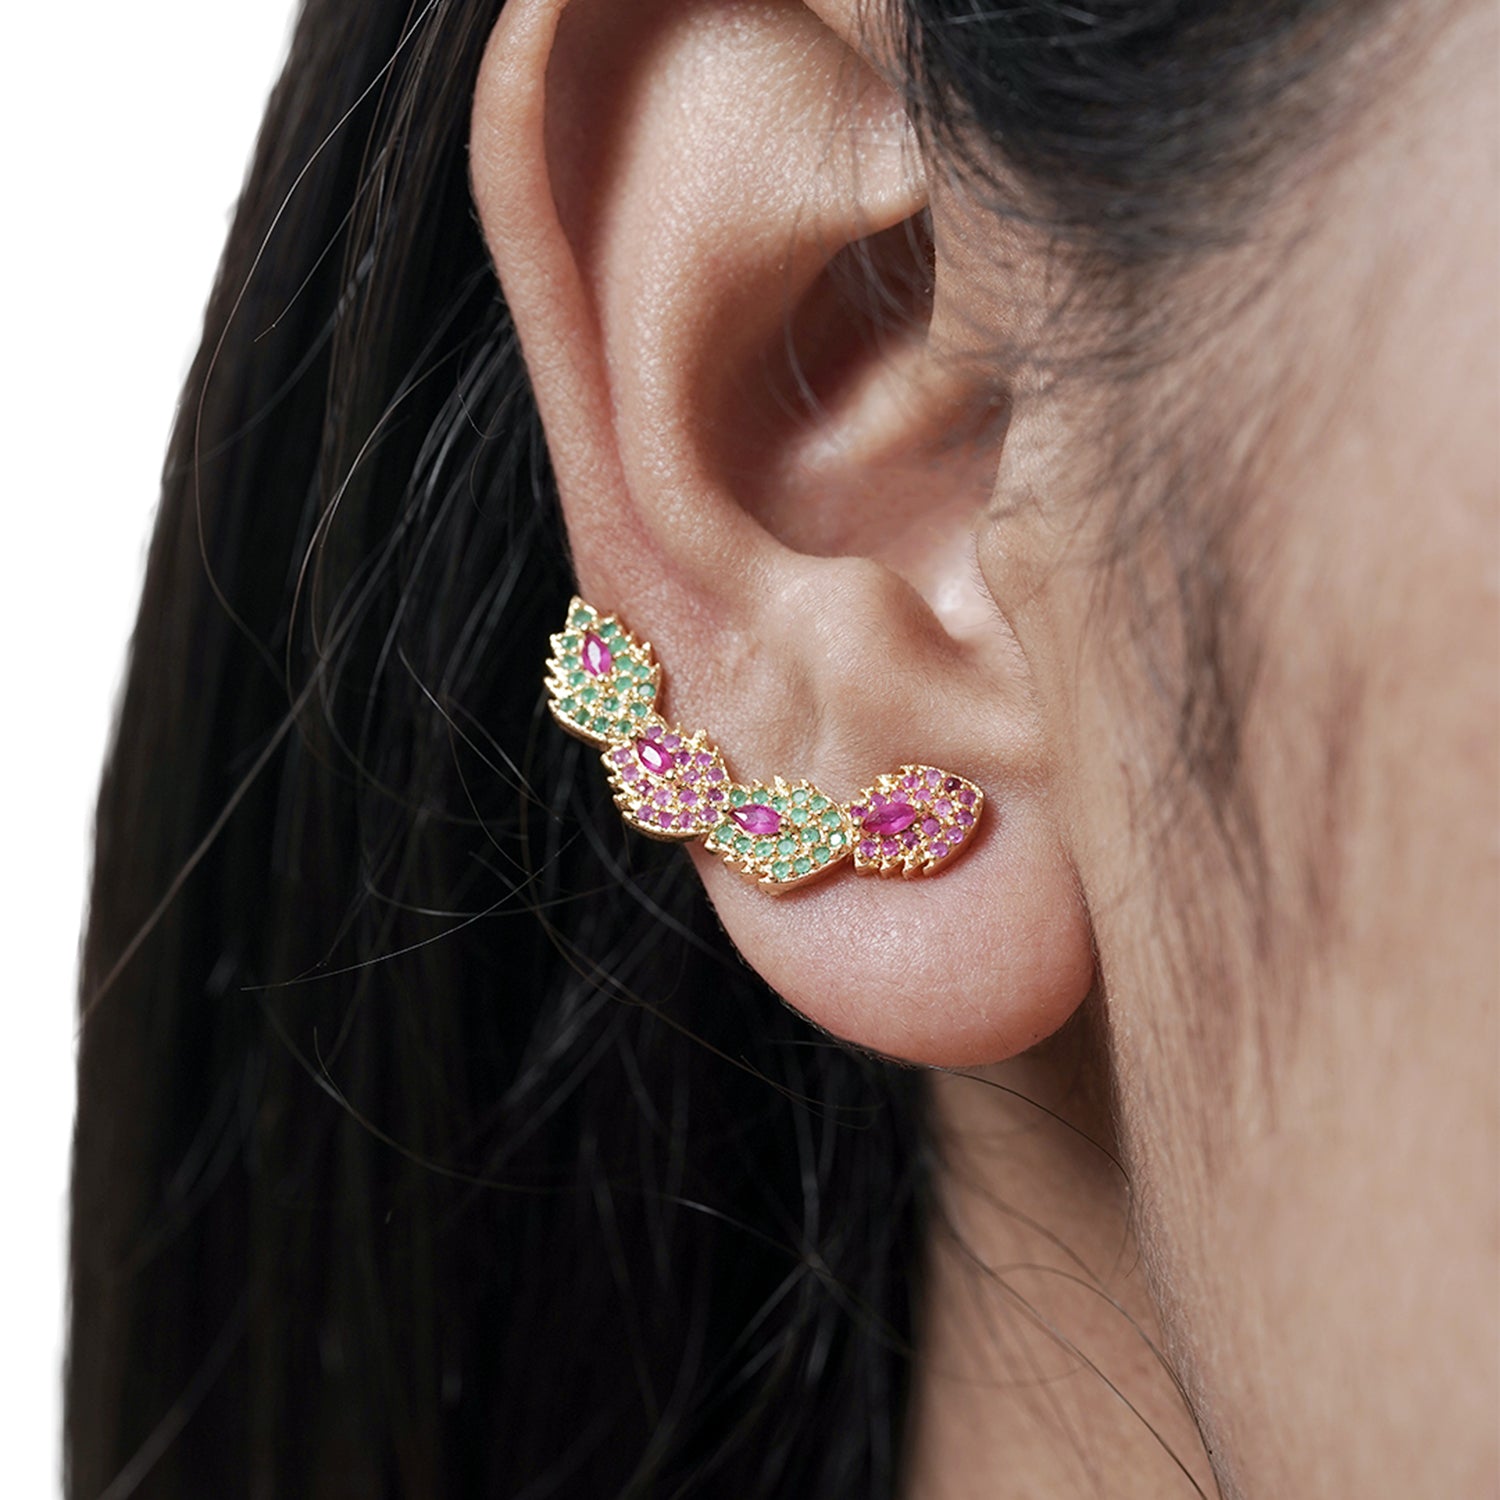 Classy Pink And Green CZ Earrings